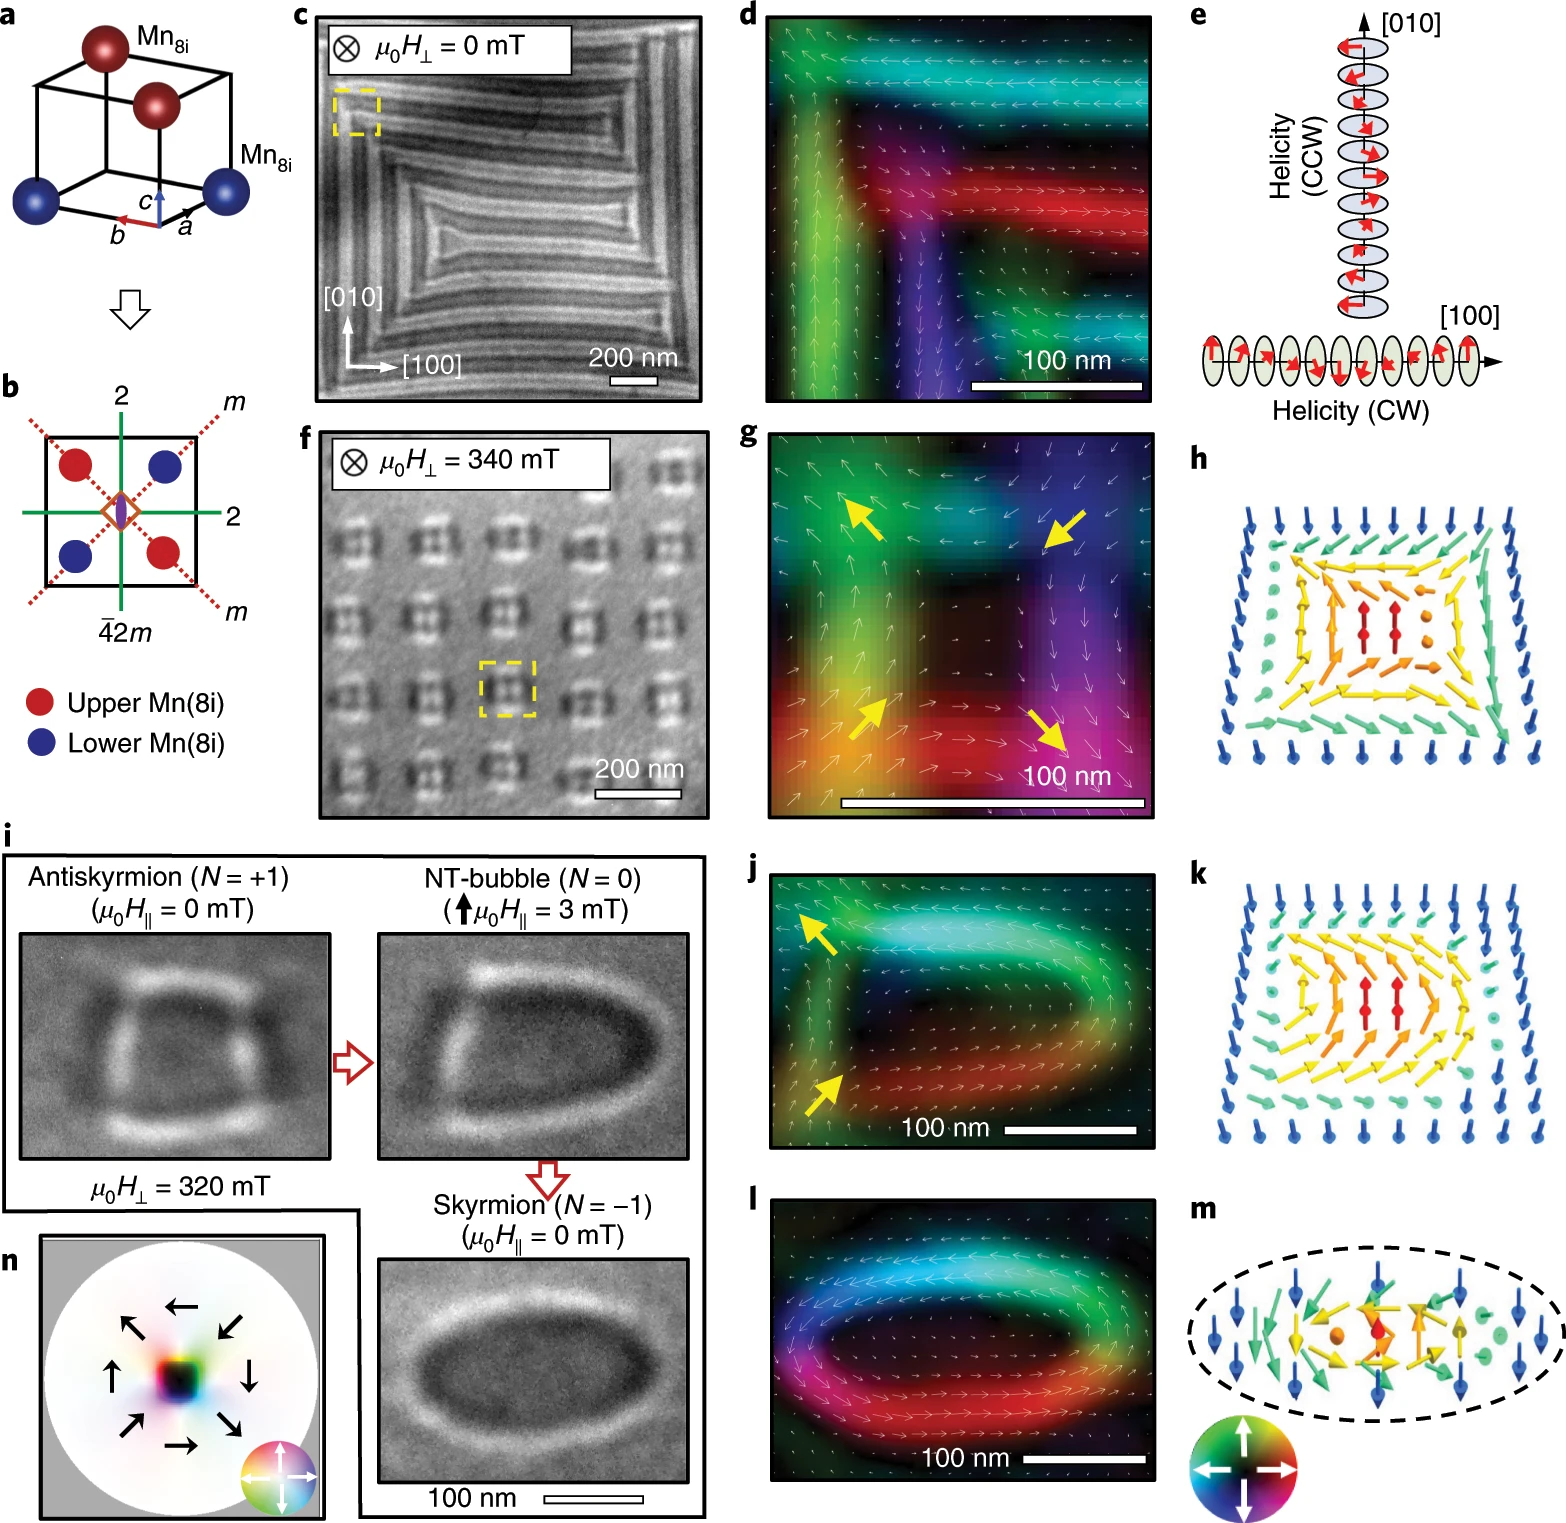 A grid of 16 images showing abstract shapes and figures. Five are grey - electron microscope images, and four are black with bright colored shapes - visualizations of magnetic fields.